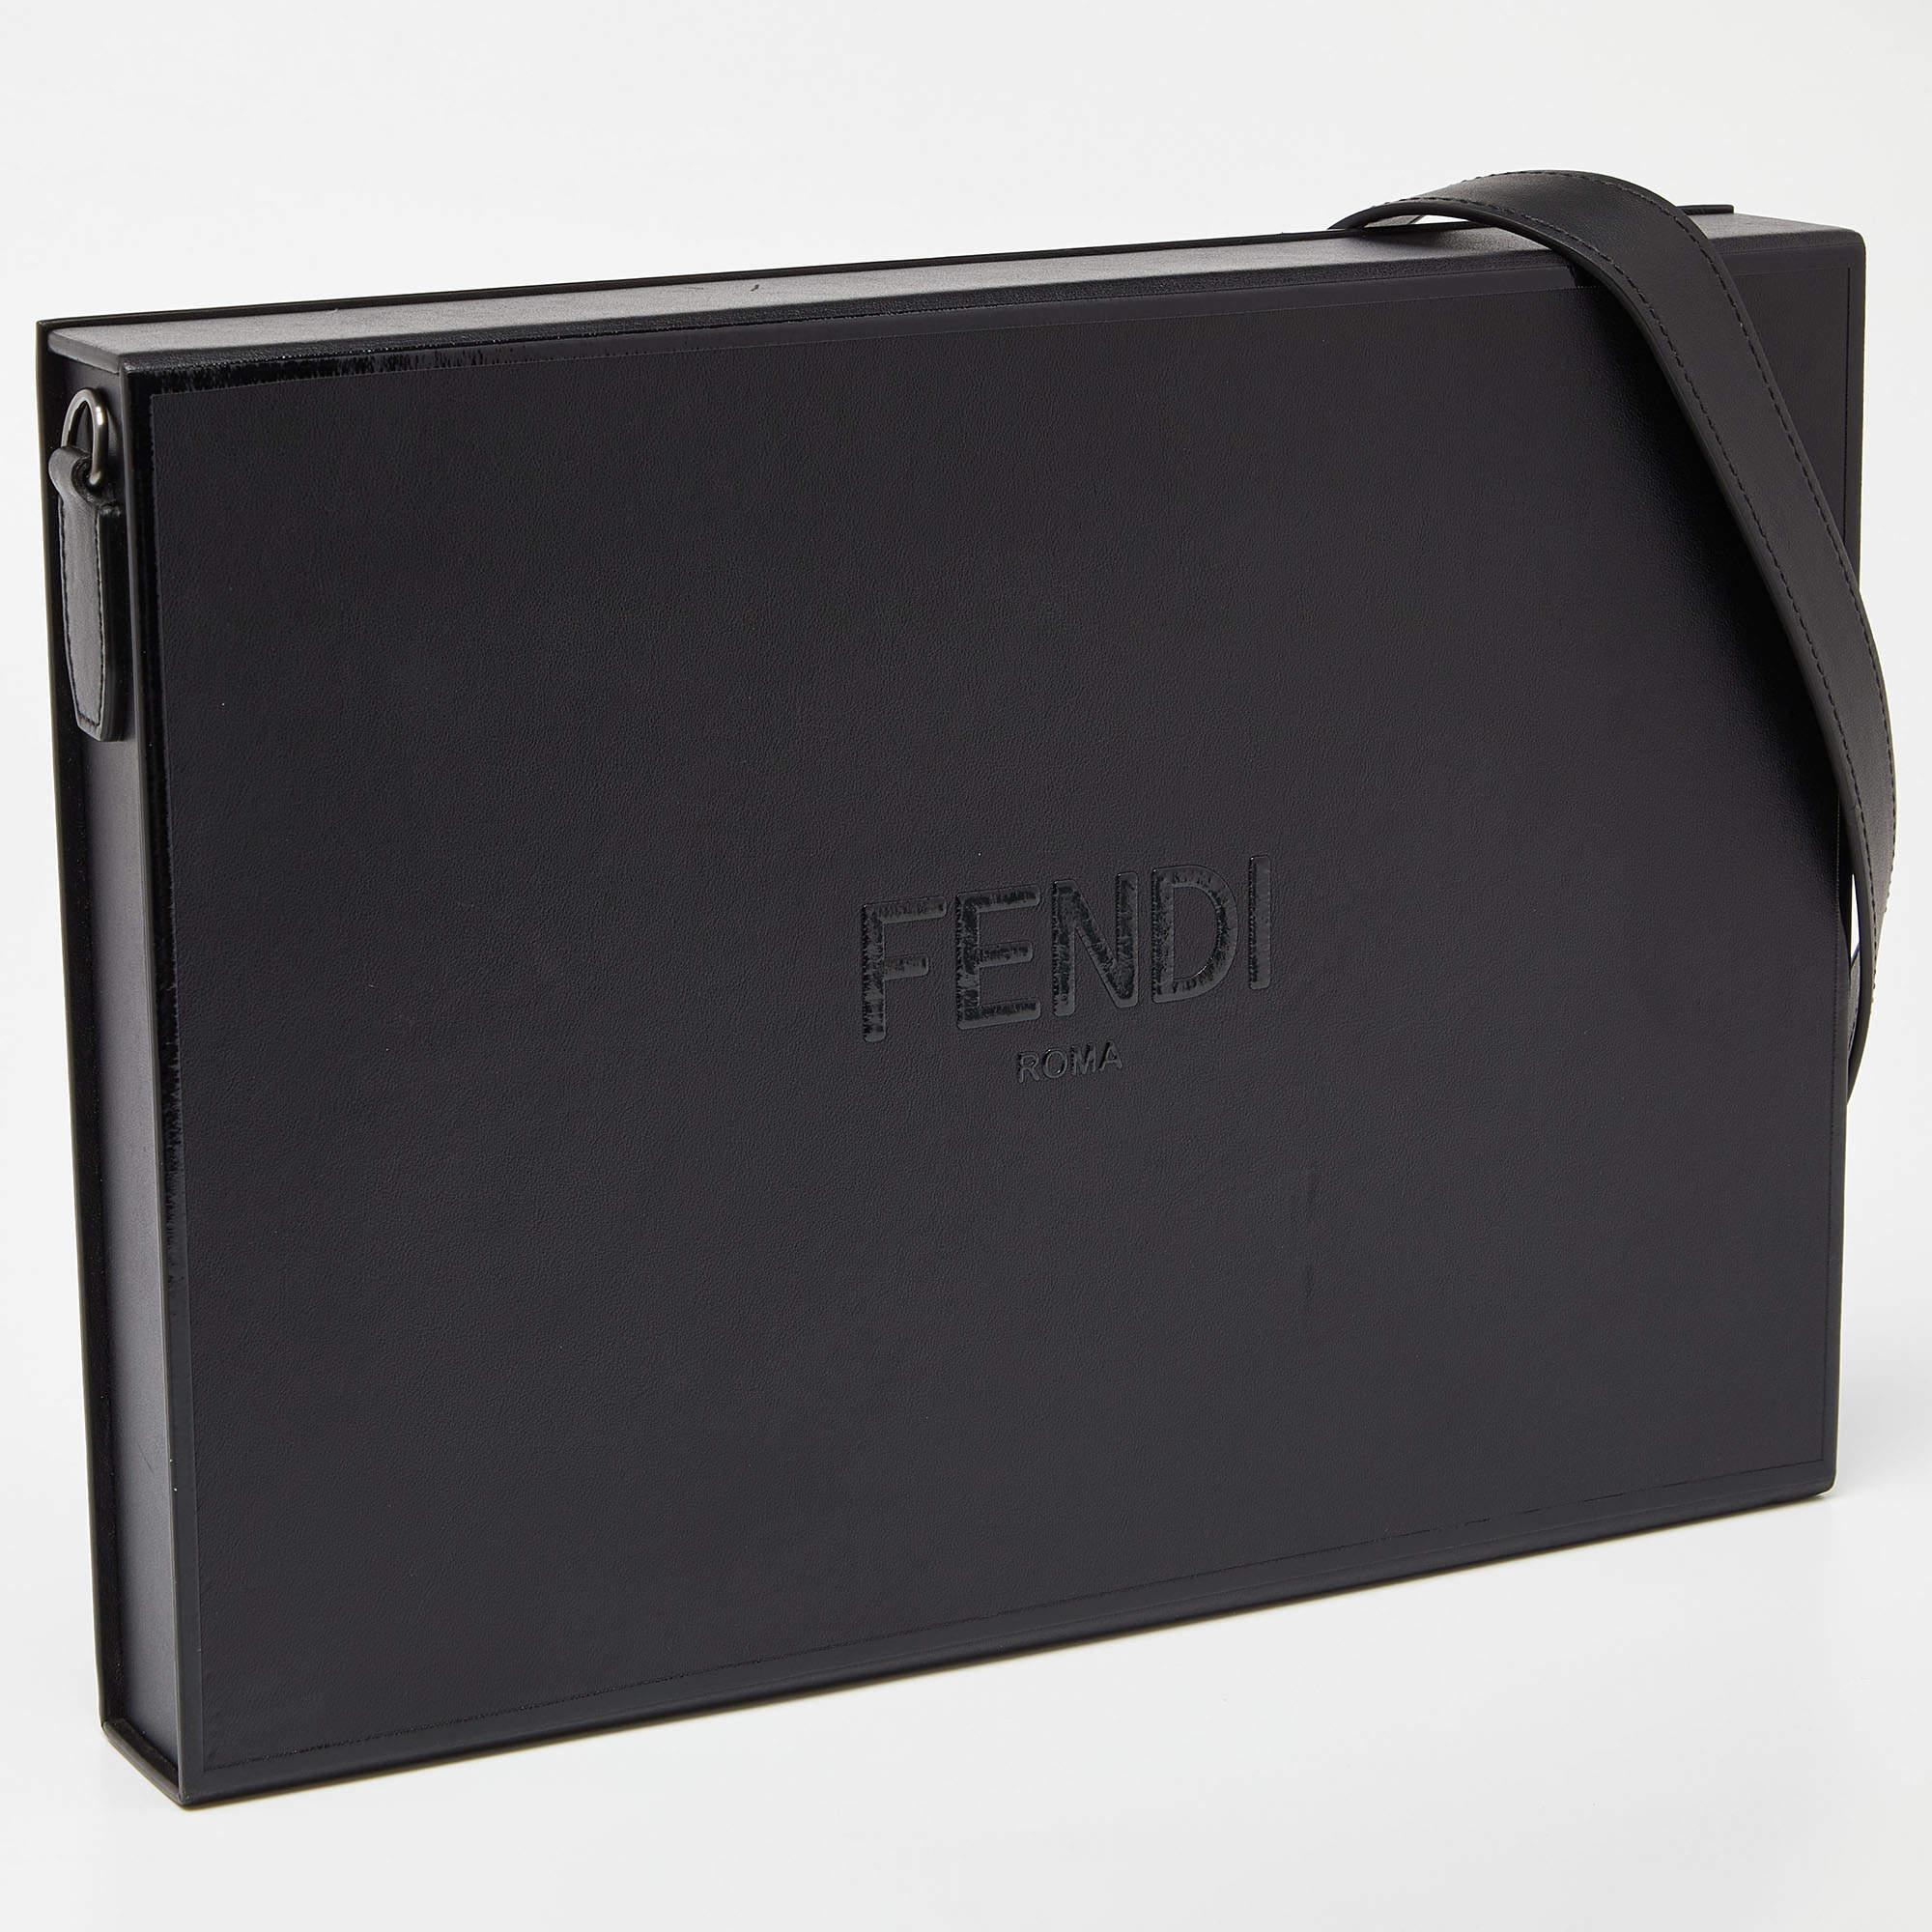 Marked by flawless craftsmanship and enduring appeal, this Fendi messenger bag for men is bound to be a versatile and durable accessory. It has a spacious size.

